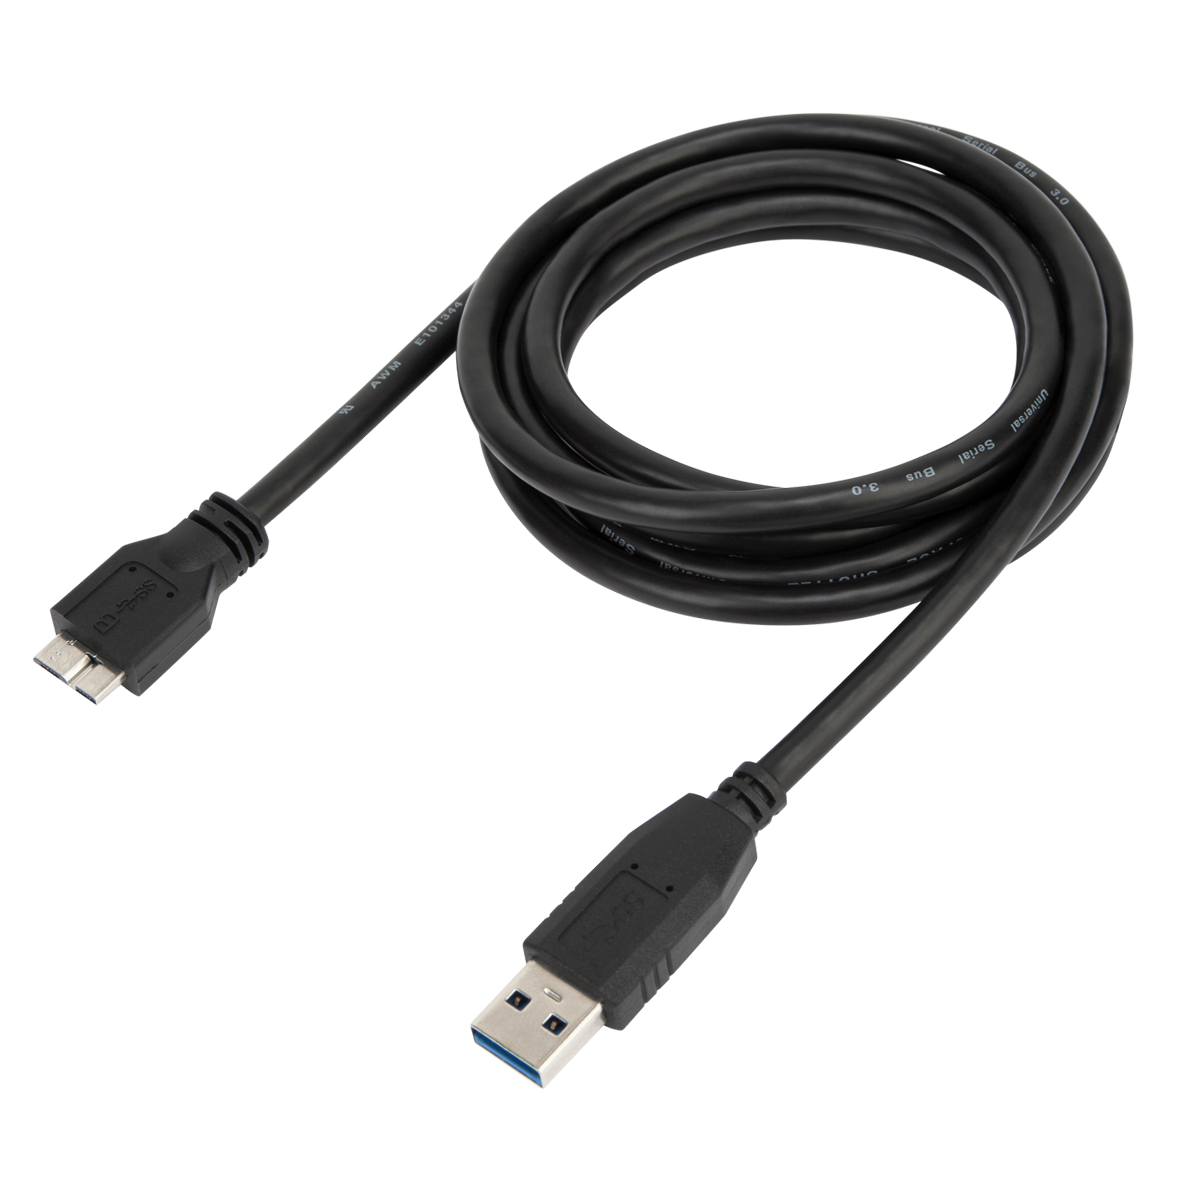 18m Usb A Male To Micro Usb B Male Cable Acc1005usz Cables 